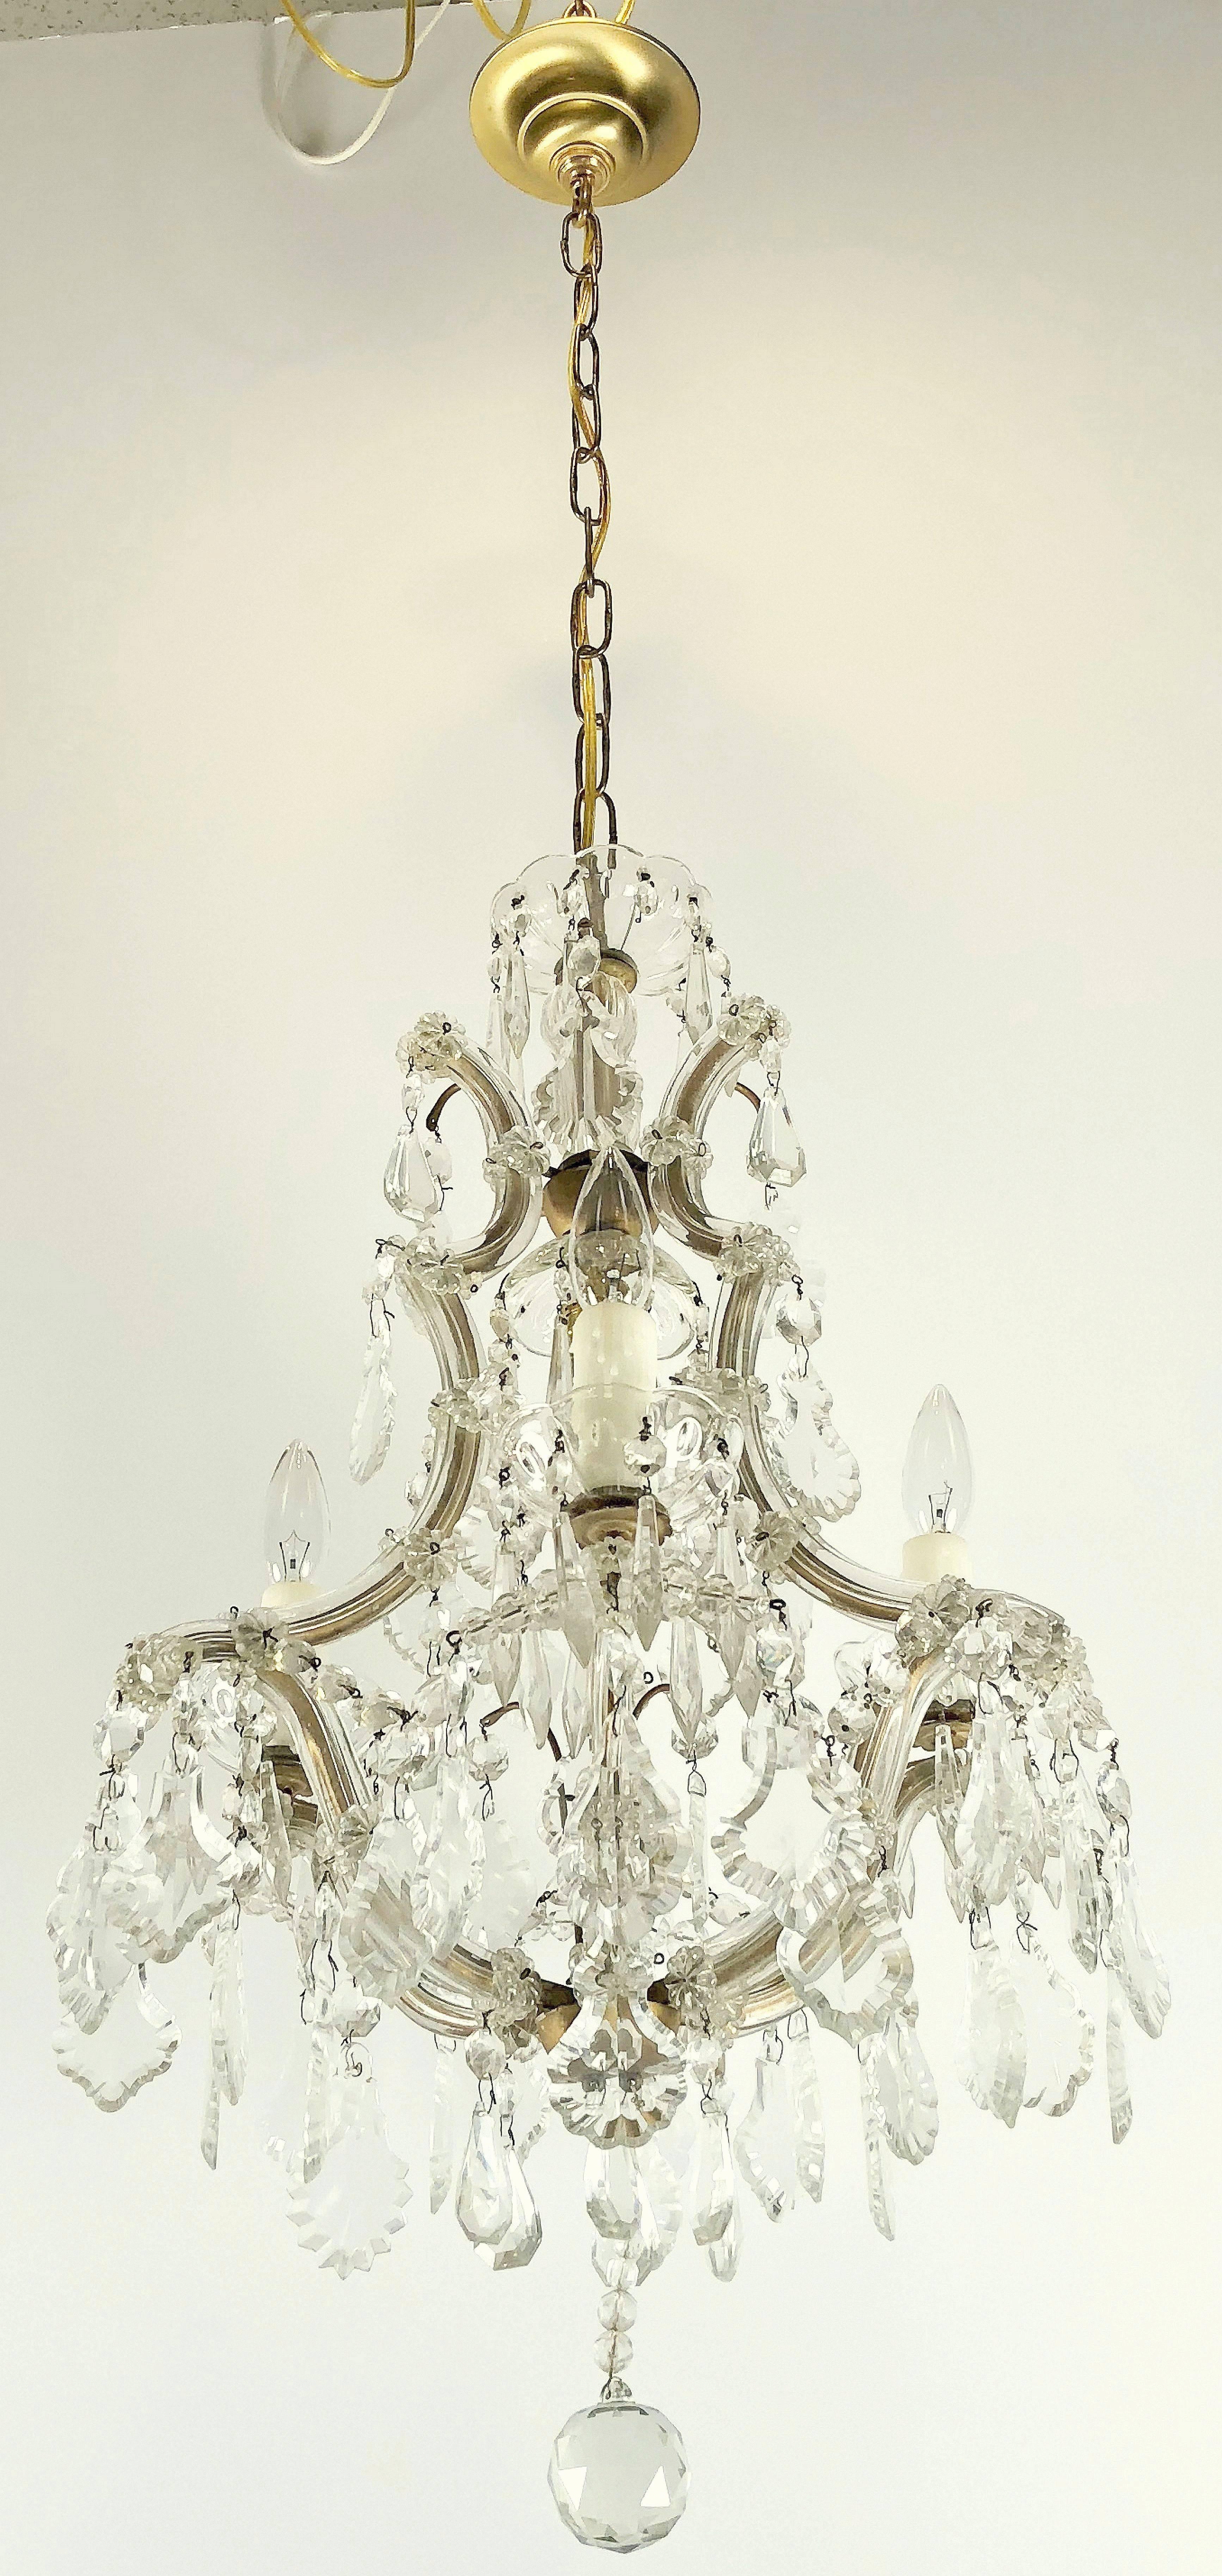 A fine Maria Theresa four-light chandelier (or hanging fixture) of crystal, glass and gilt metal featuring serpentine arms, each candle light with dangling pendants and decorative bobeches.

Measures: 17 inches diameter

U.S. wired and ready for